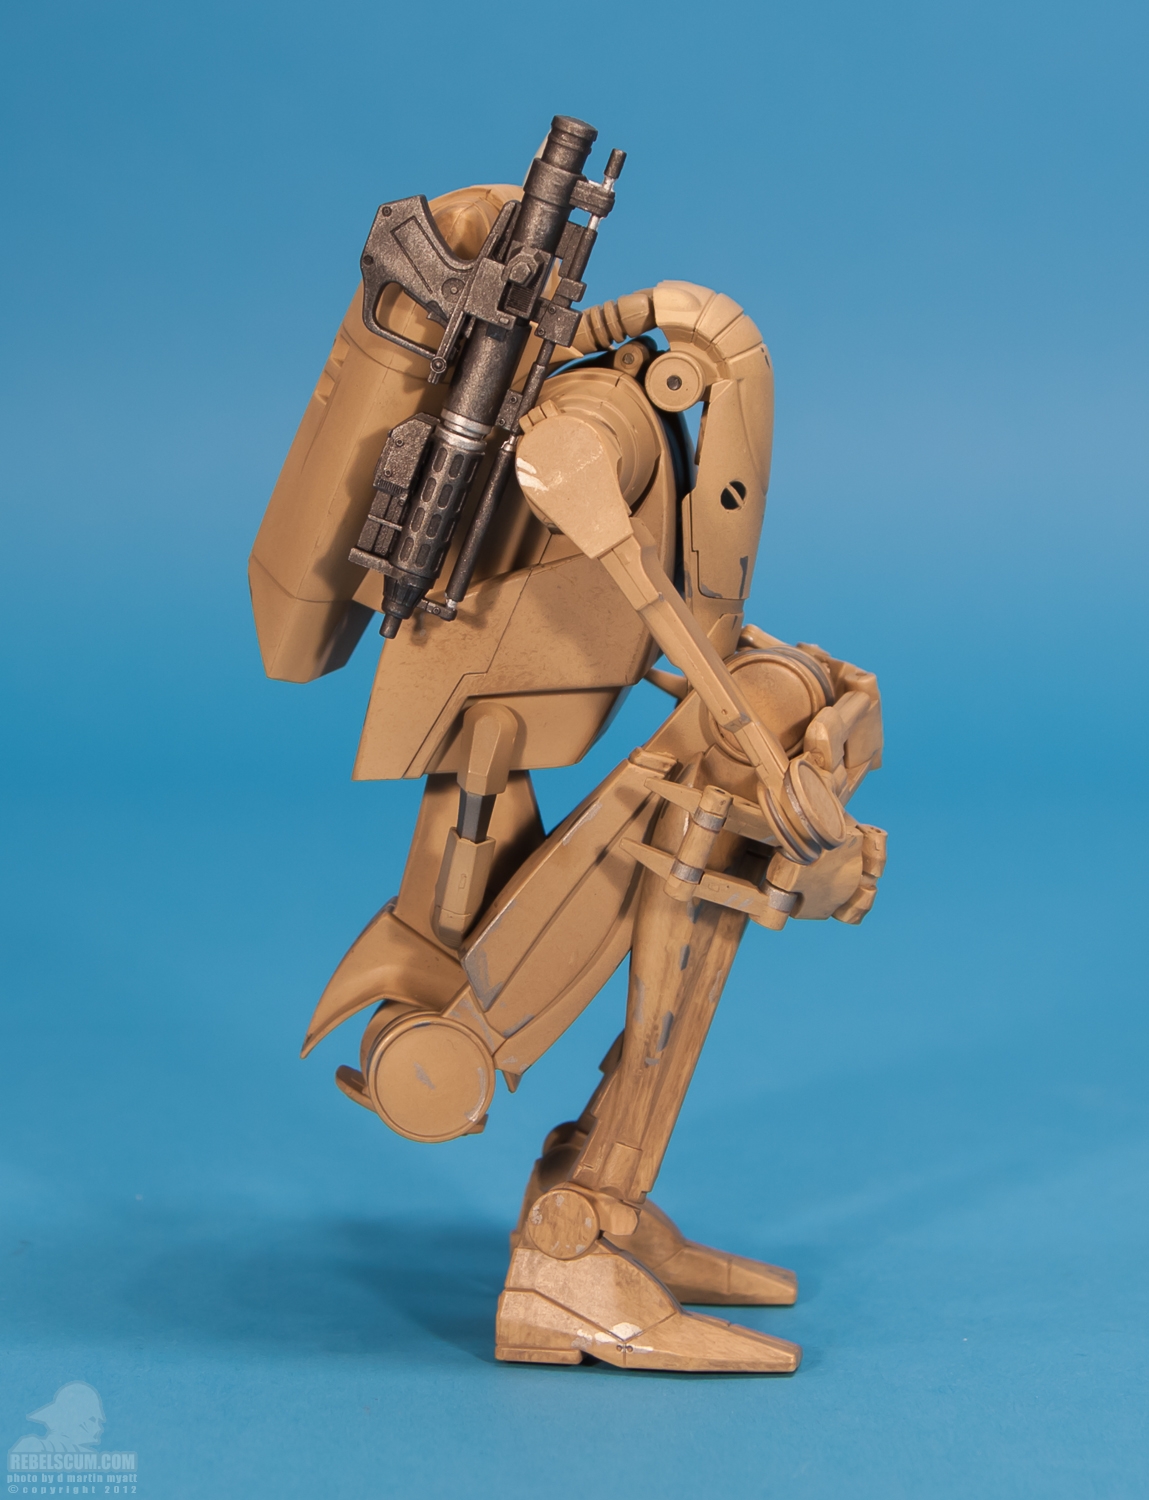 STAP_Battle_Droid_Star_Wars_Sideshow_Collectibles-14.jpg